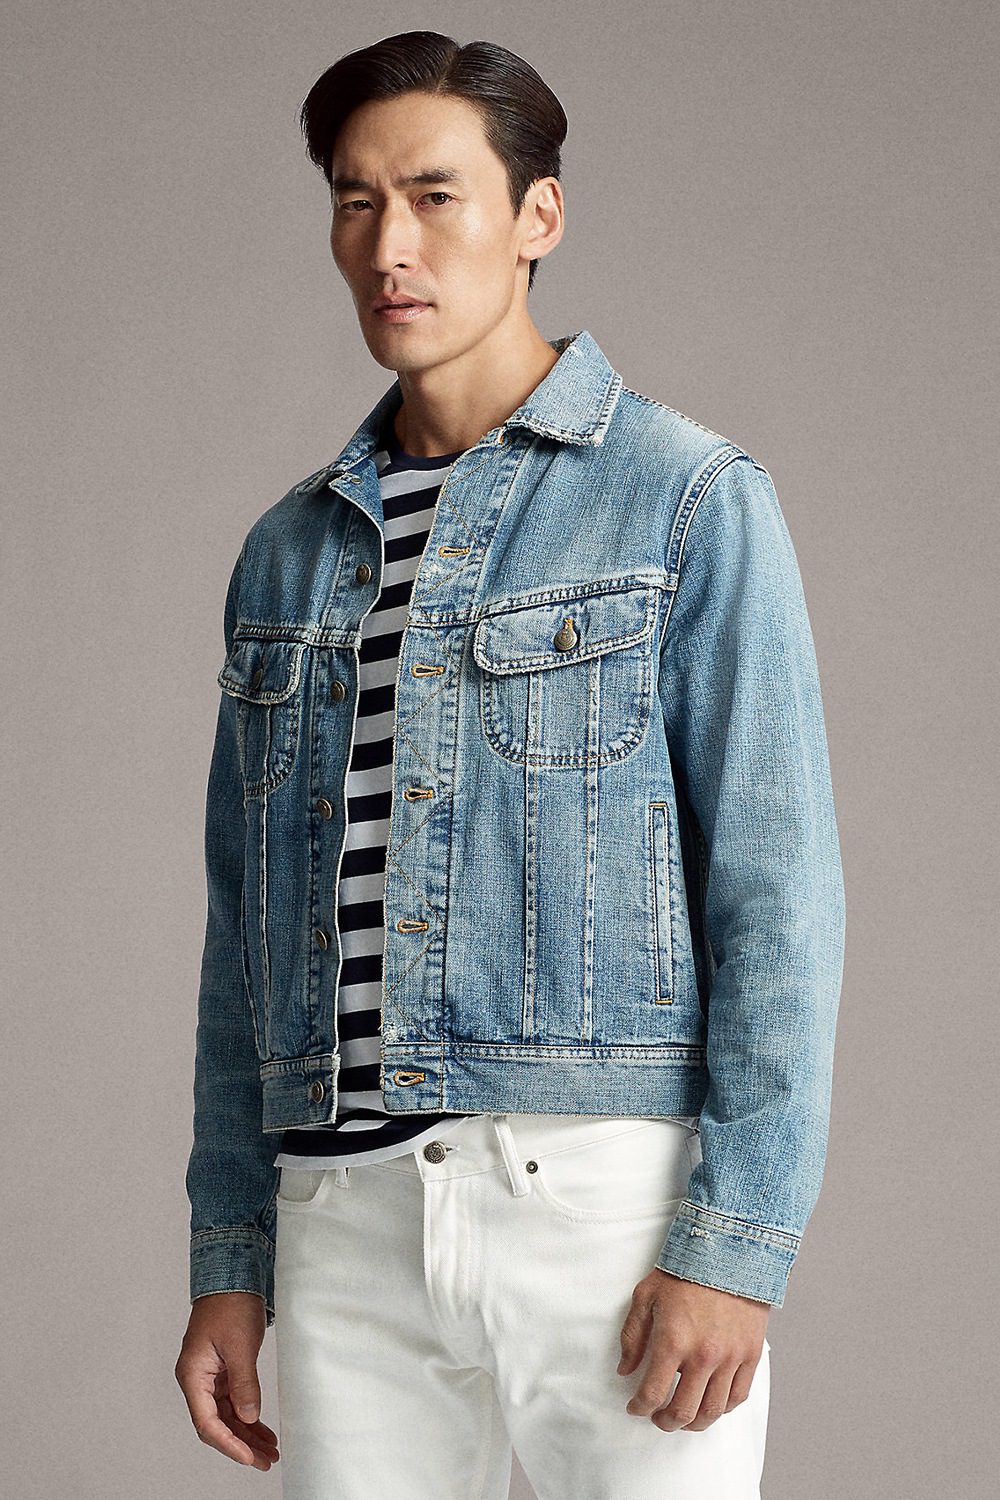 White T-shirt Denim jacket and Black ripped denim with White Sneakers ⋆  Best Fashion Blog For Men - TheUnstitchd.com